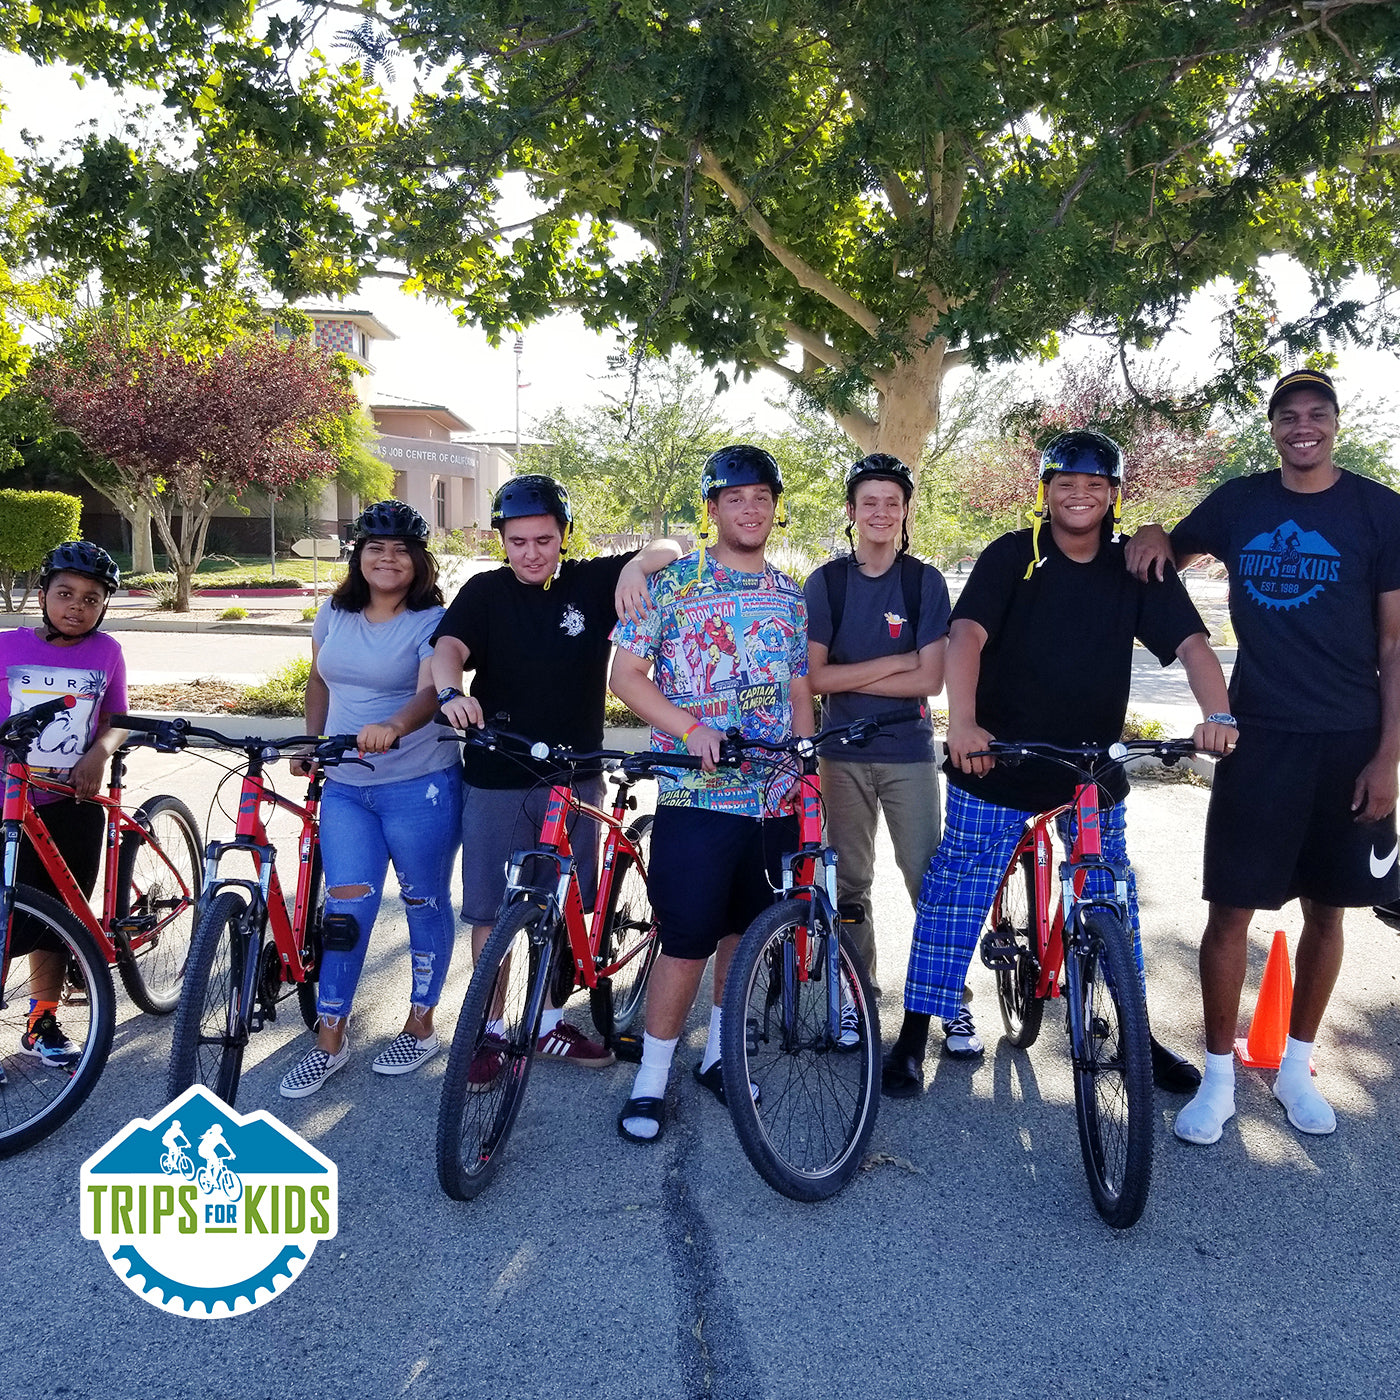 Trips for Kids crew on bikes